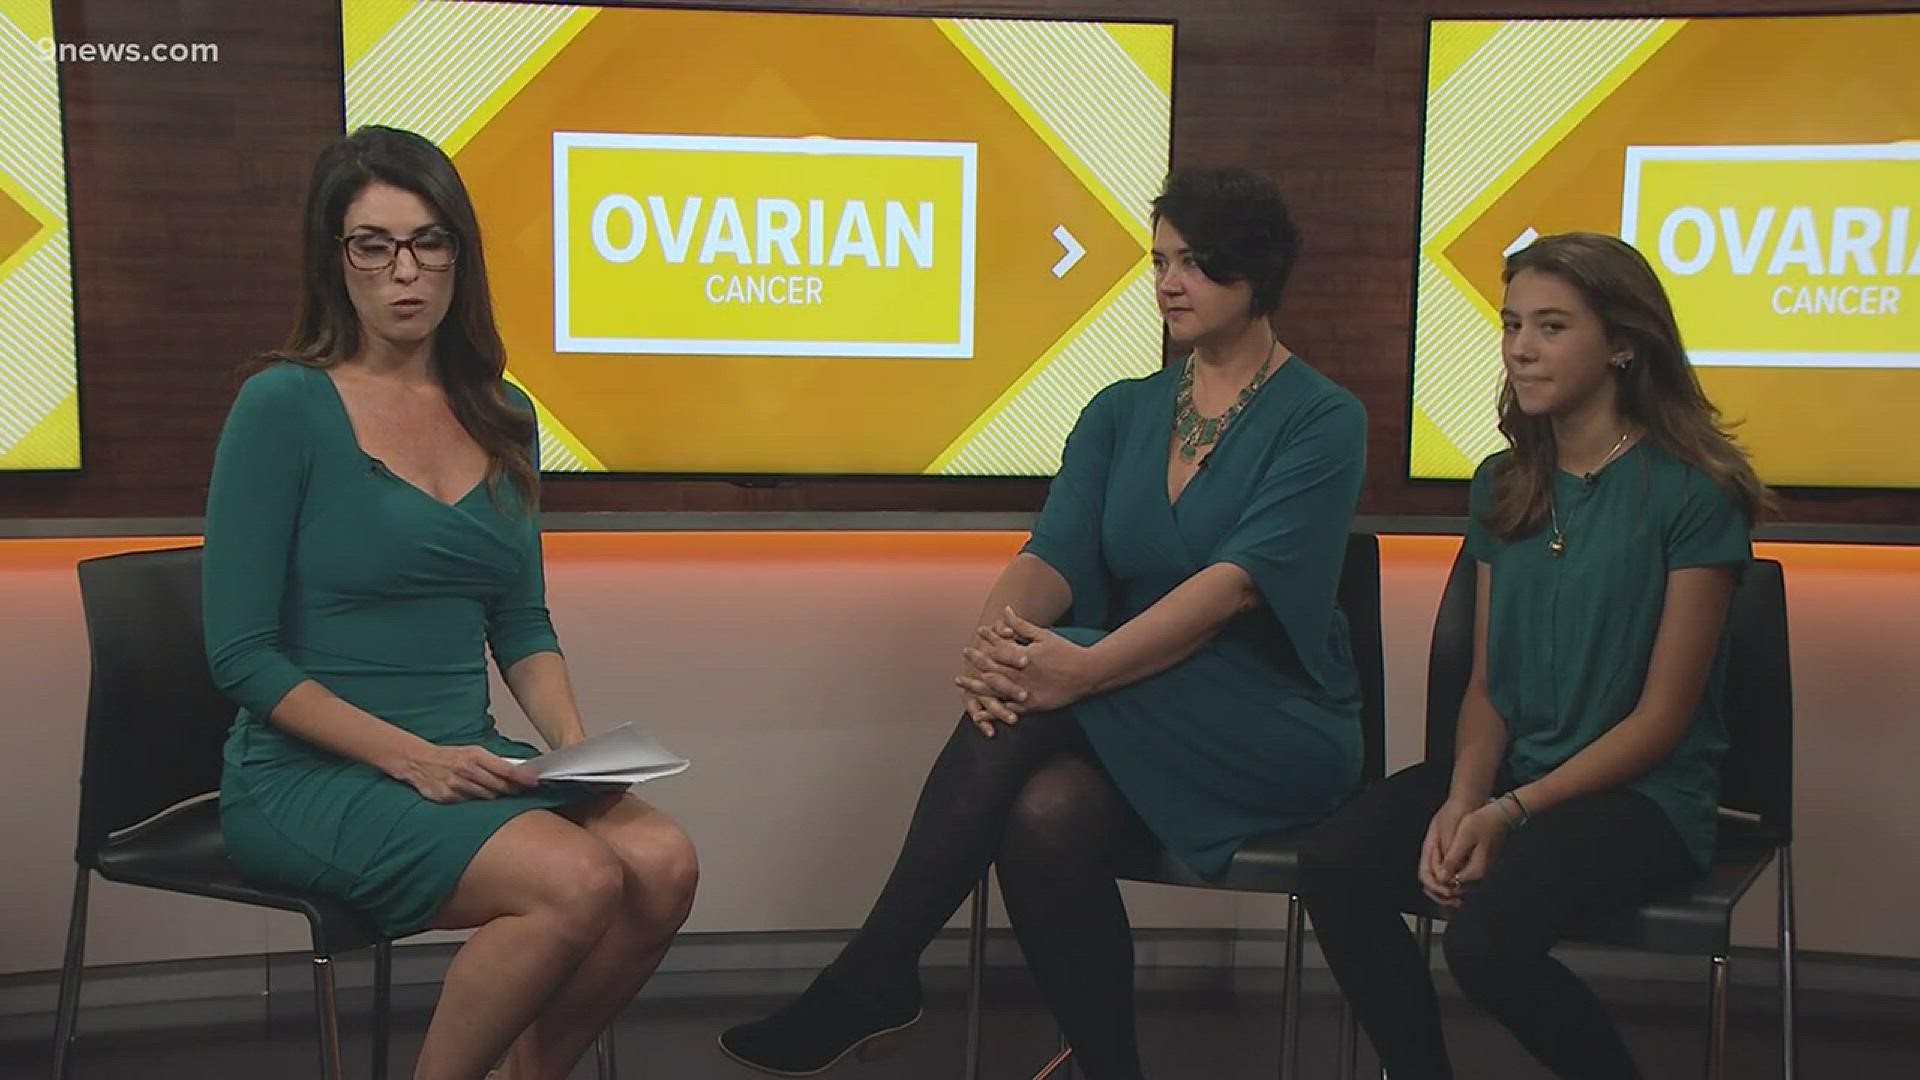 According to the Colorado Ovarian Cancer Alliance, one in 72 women are estimated to be diagnosed with ovarian cancer in their lifetime.